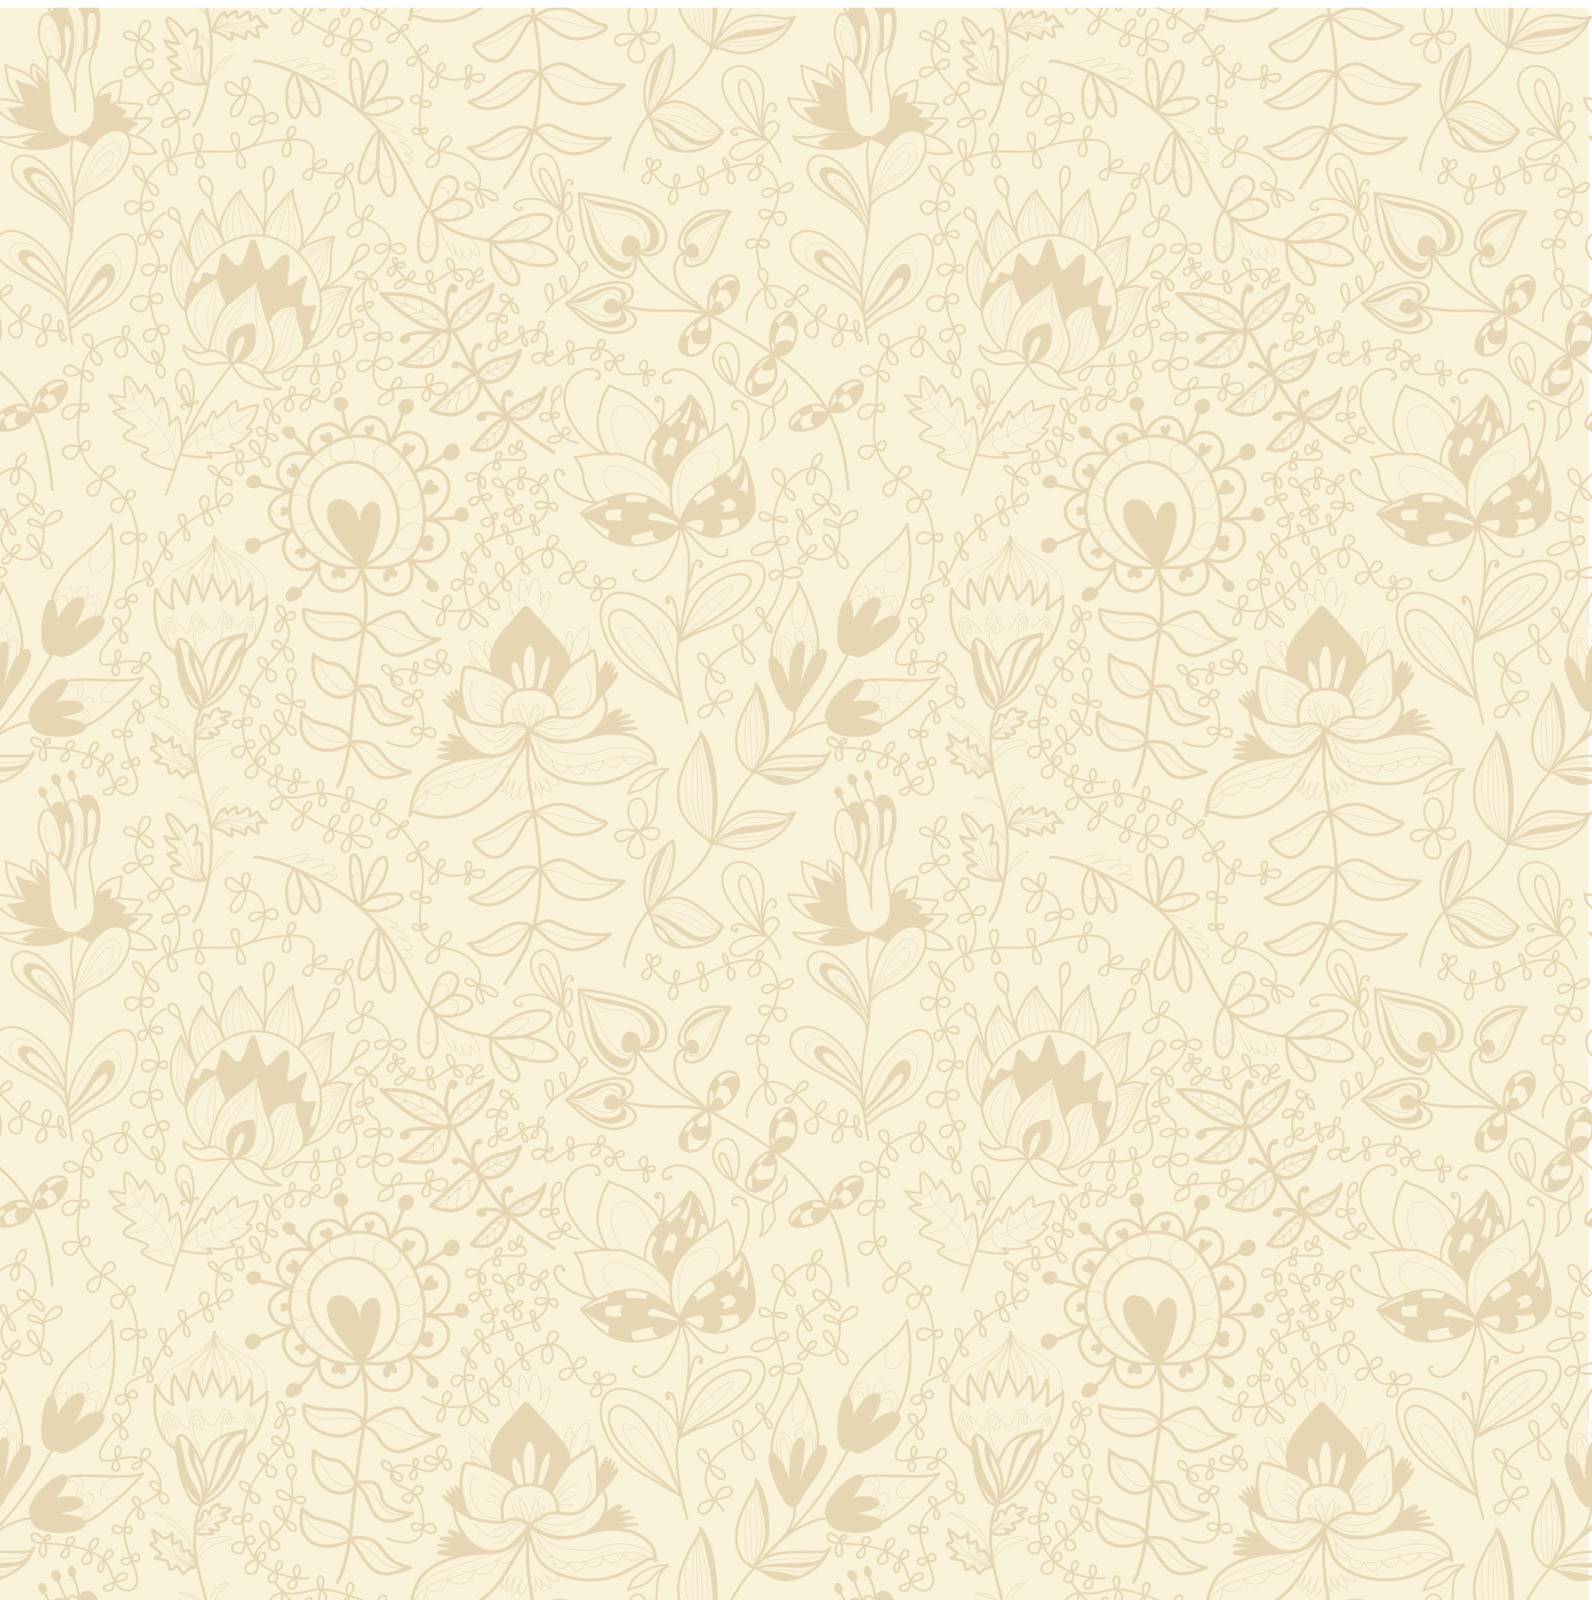 floral wallpaper by LittleCuckoo